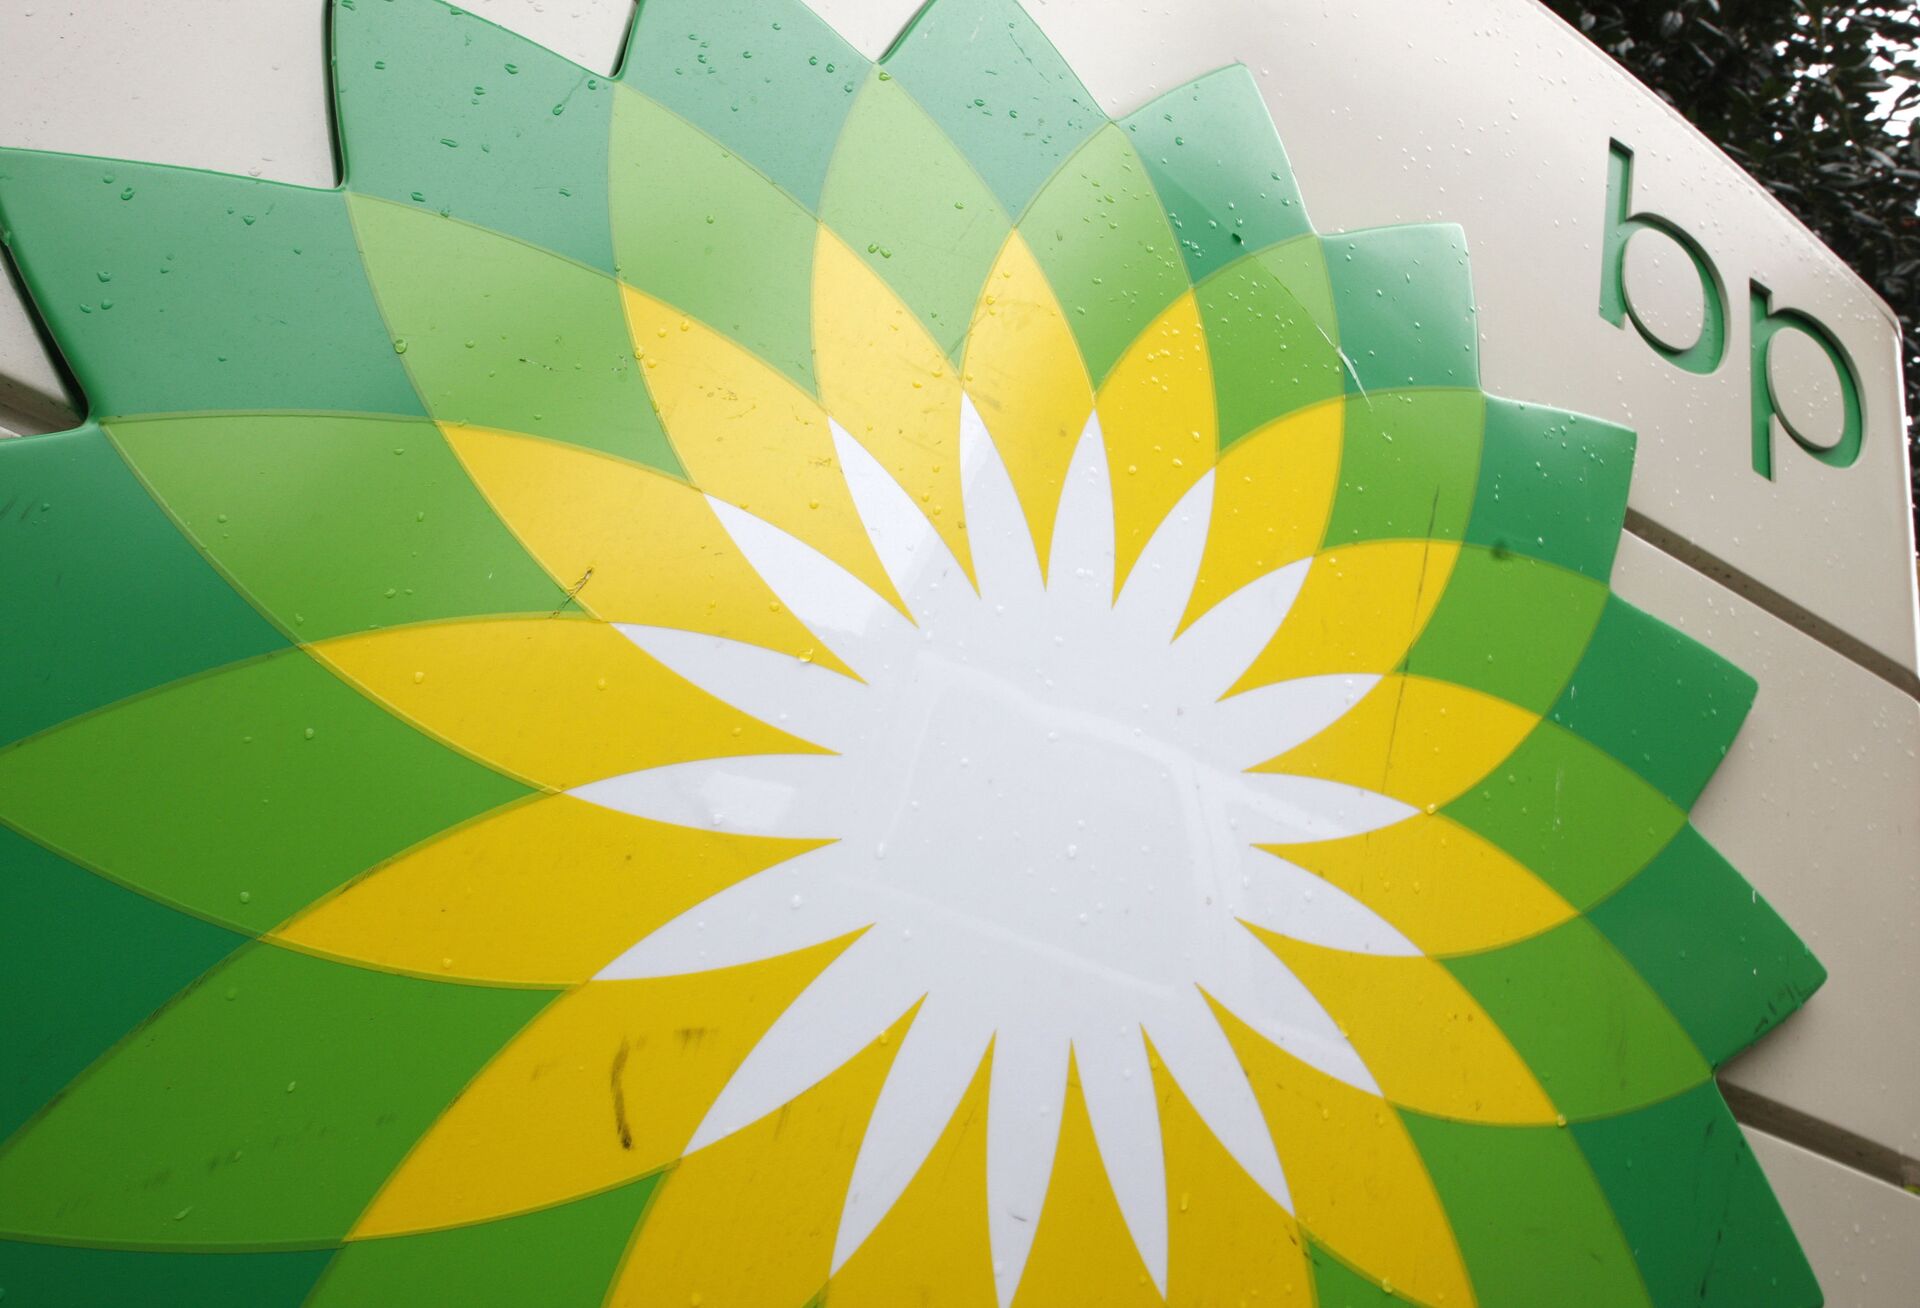 FILE - In this Oct. 25, 2007 file photo, the BP (British Petroleum) logo is seen at a gas station in Washington. BP will spend $7 billion to buy exploration rights to areas in the Gulf of Mexico, offshore Brazil and Canada owned by Devon Energy - Sputnik International, 1920, 25.08.2022